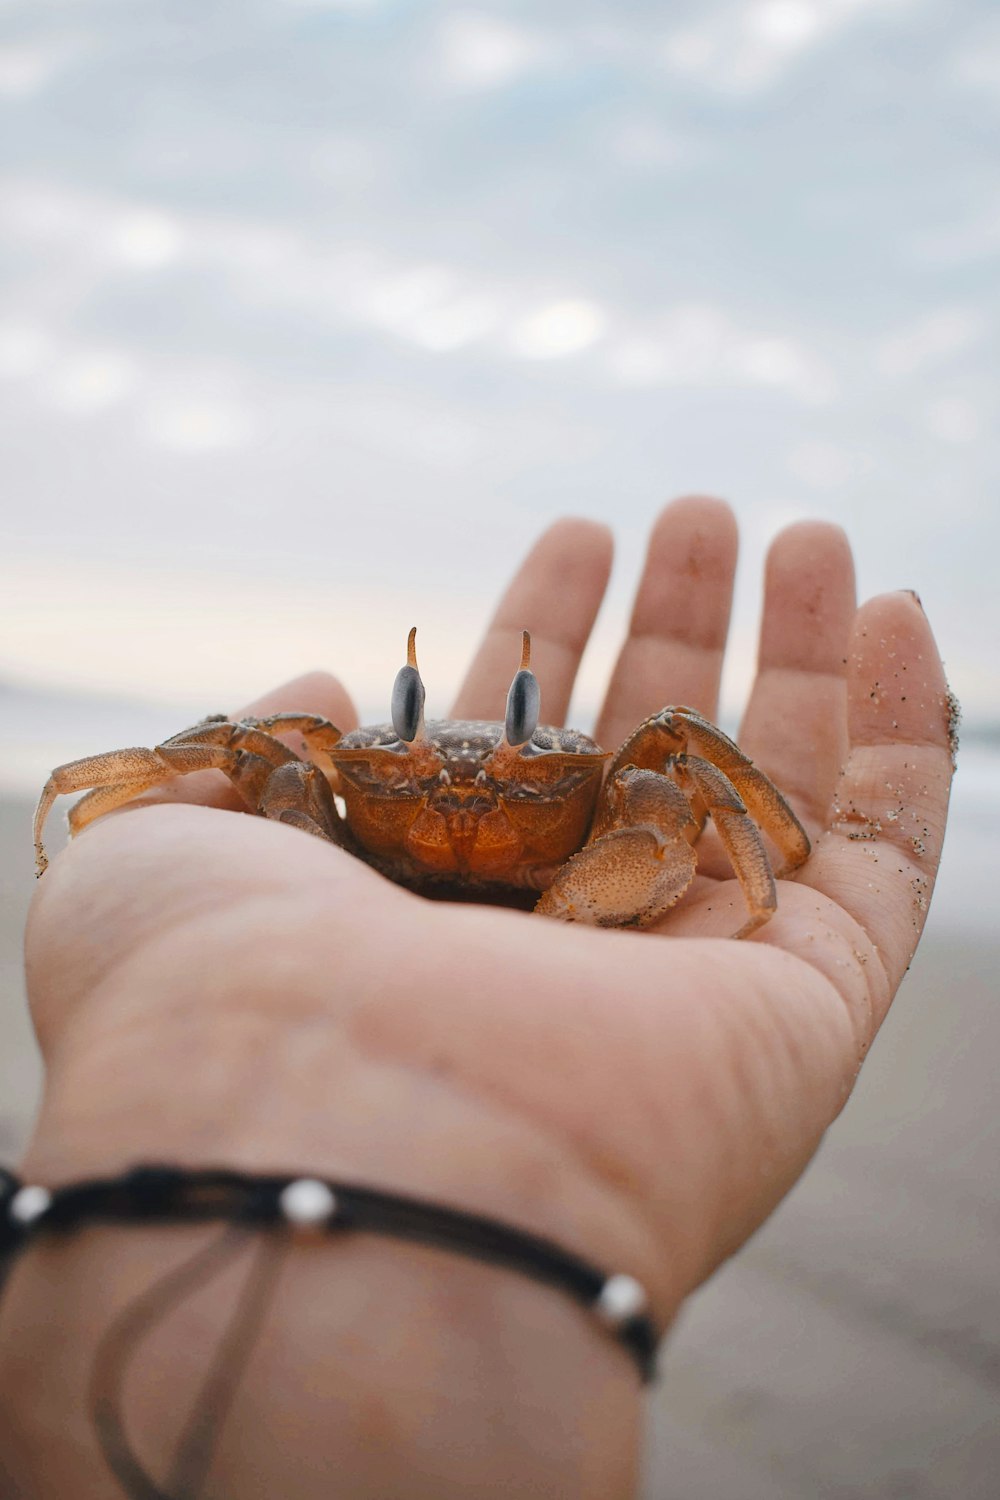 brown crab on persons hand